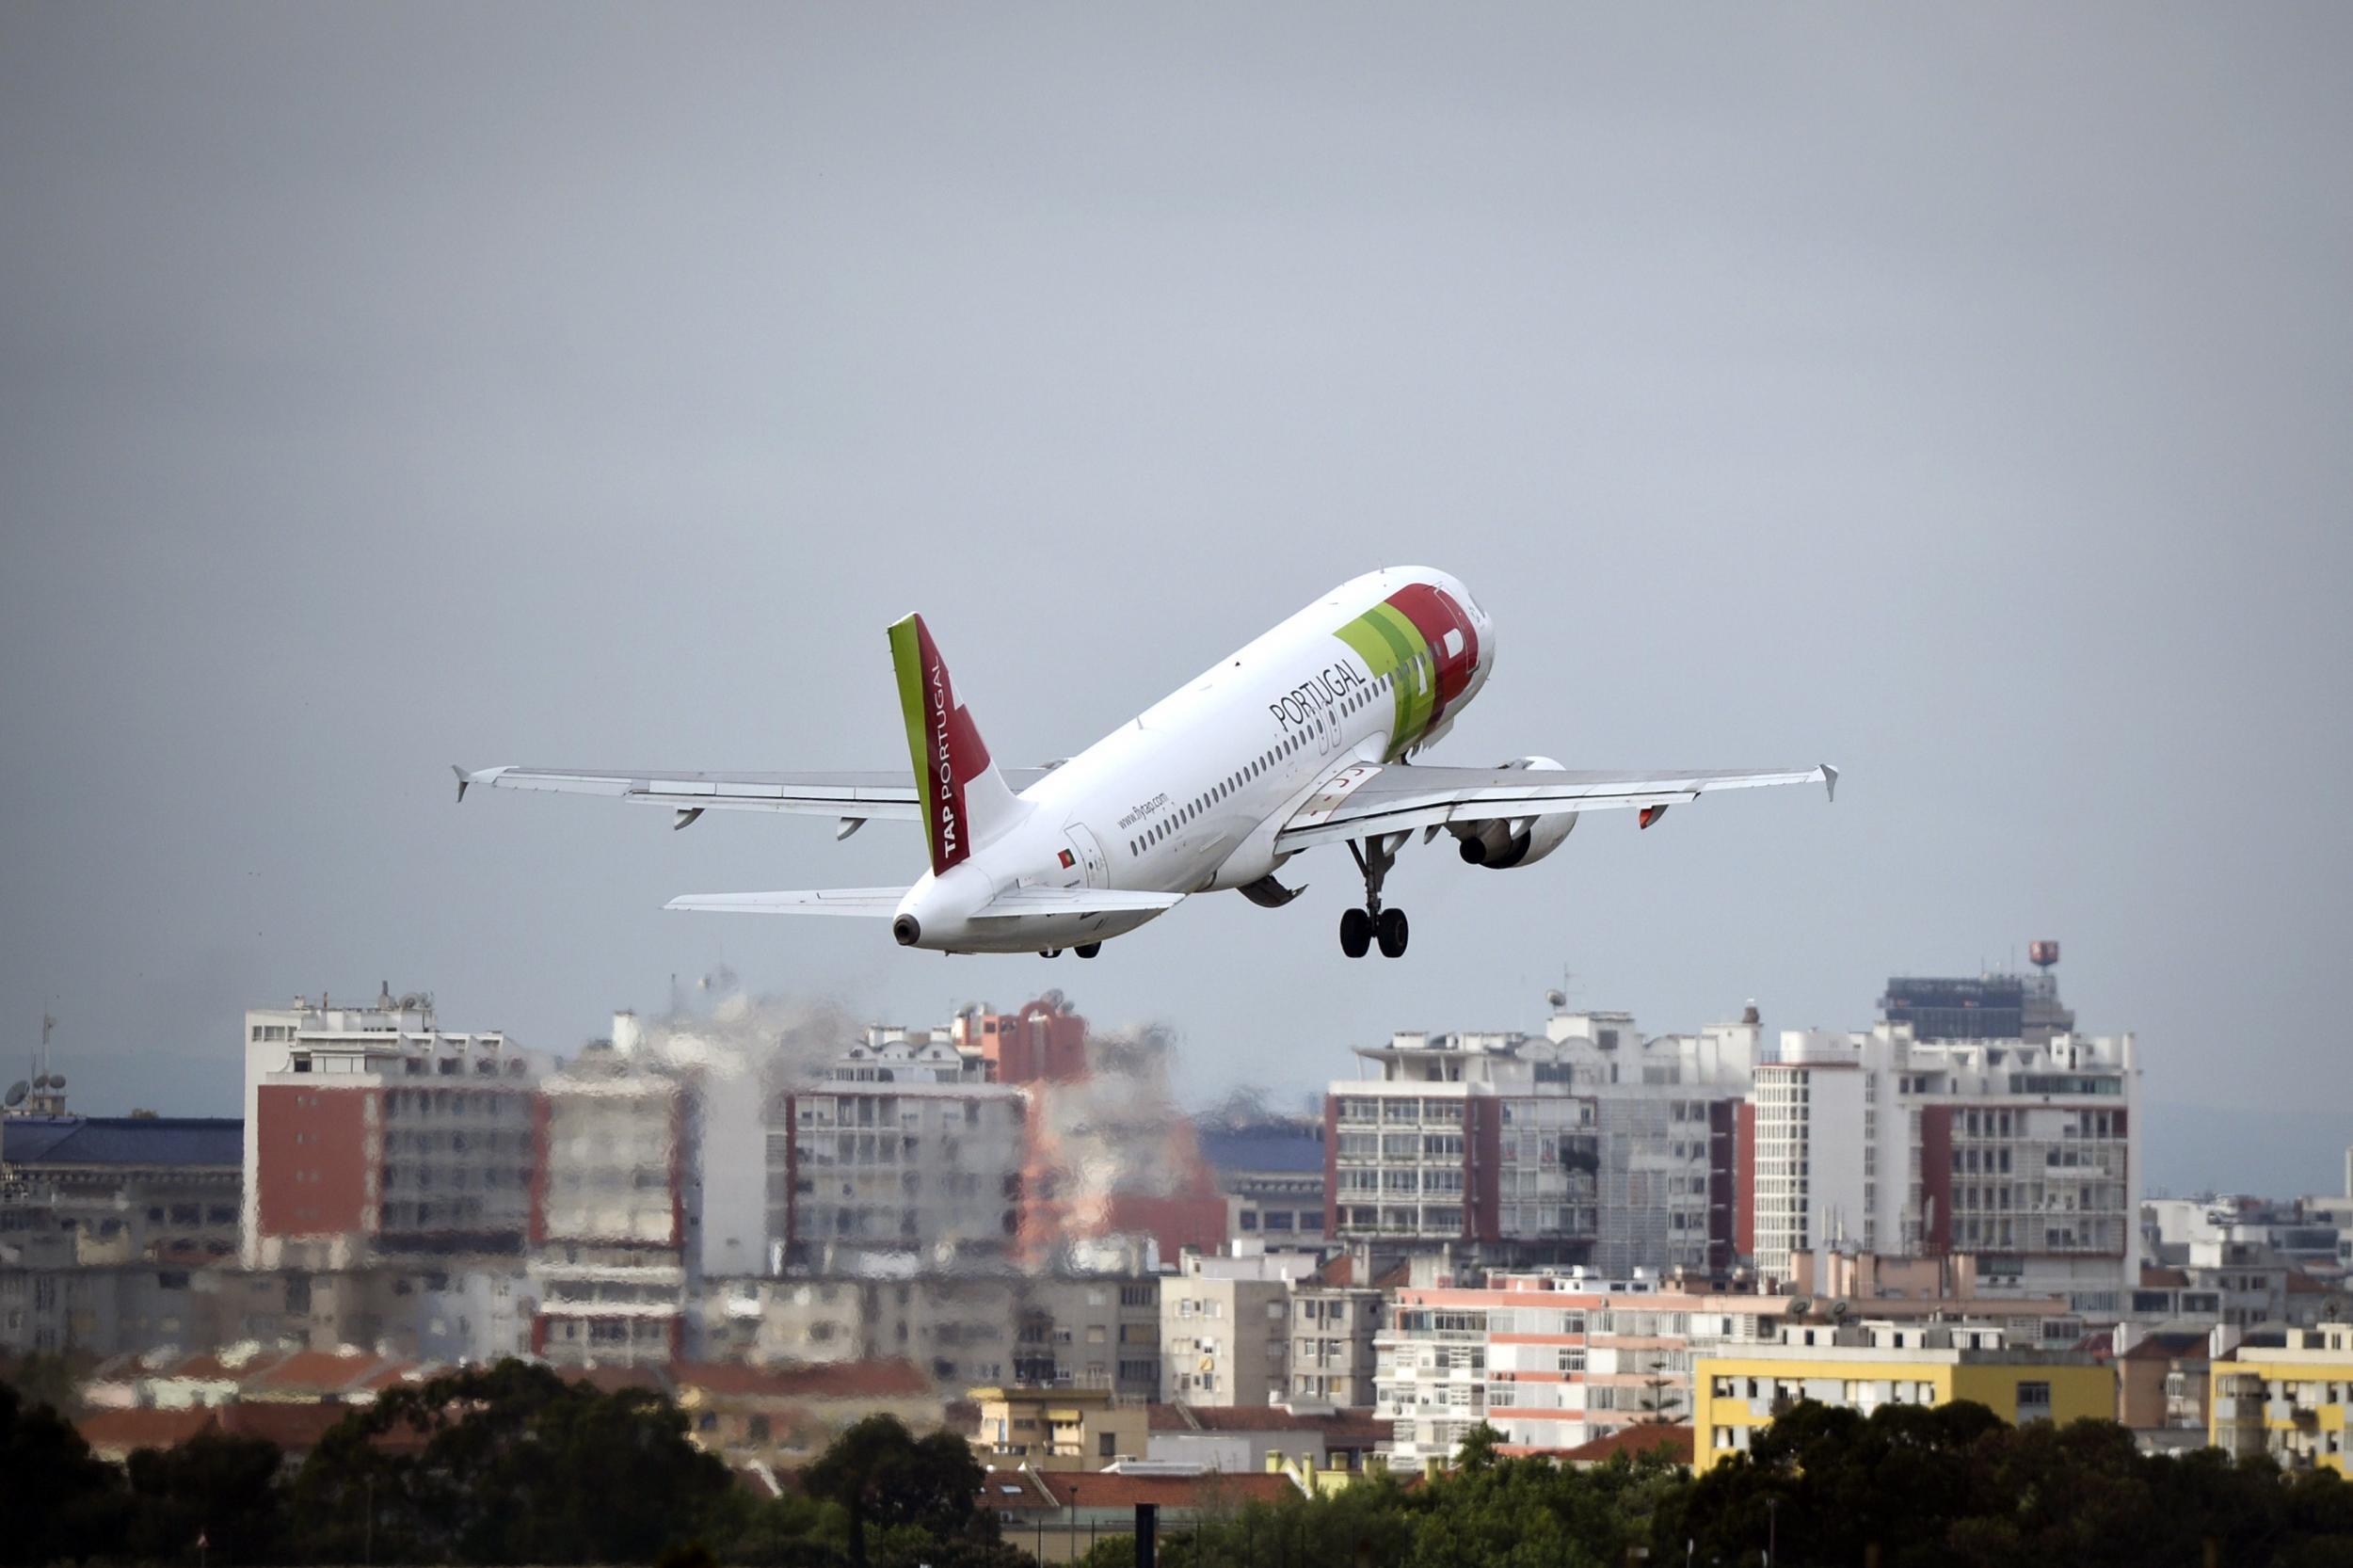 Portuguese state-owned airline TAP offers roomy jets, free food and on-time landings, according to our travel correspondent